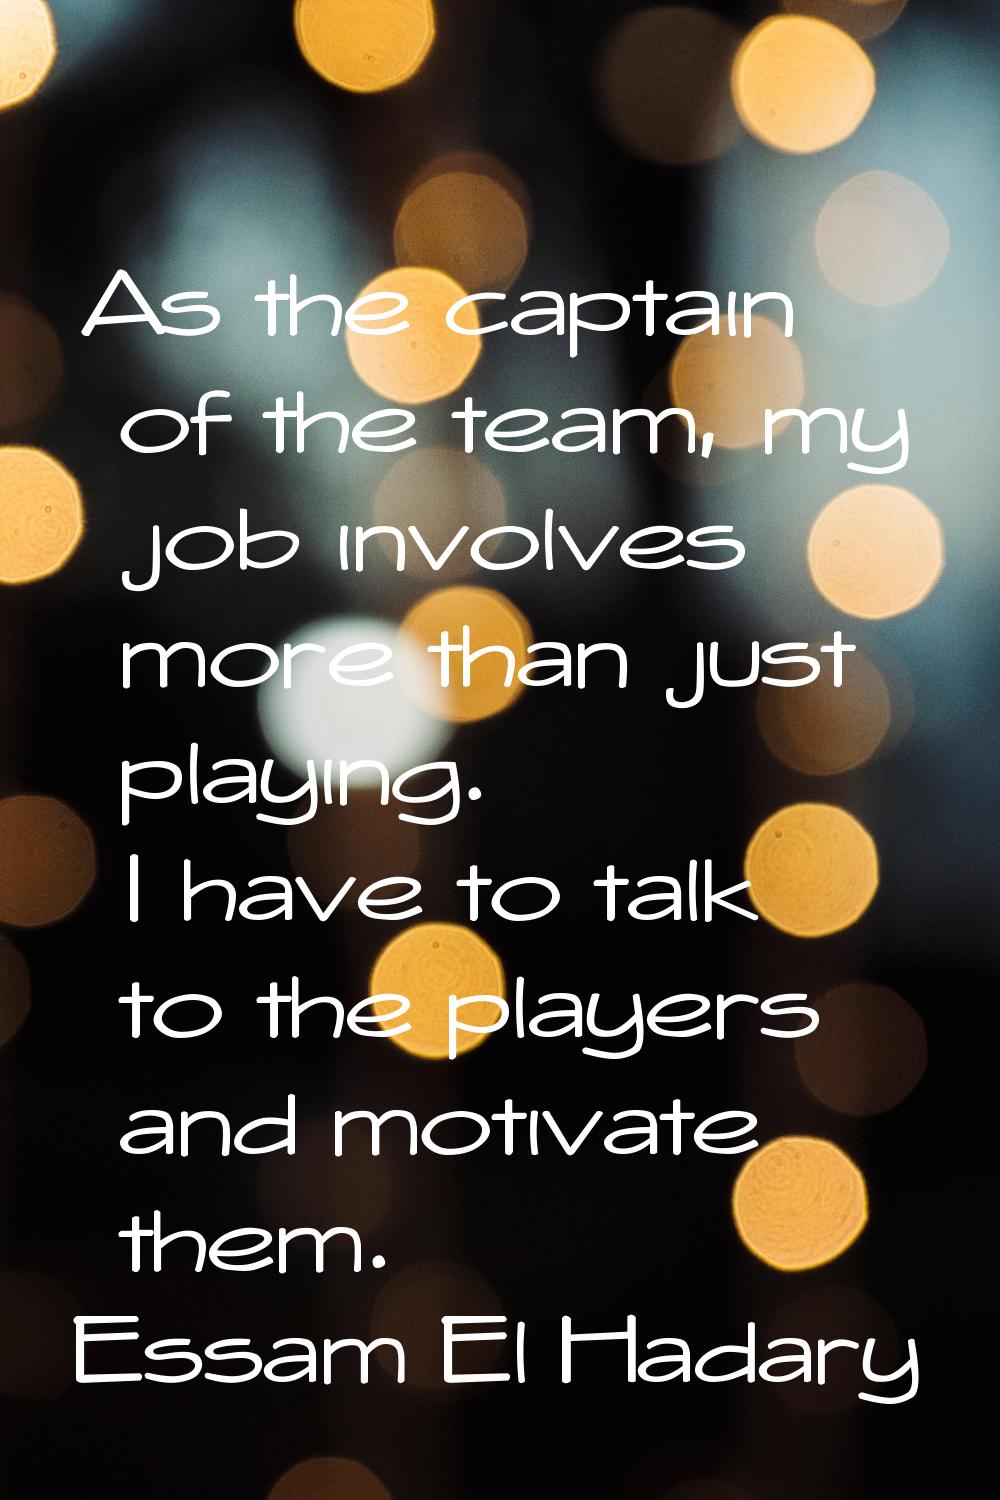 As the captain of the team, my job involves more than just playing. I have to talk to the players a